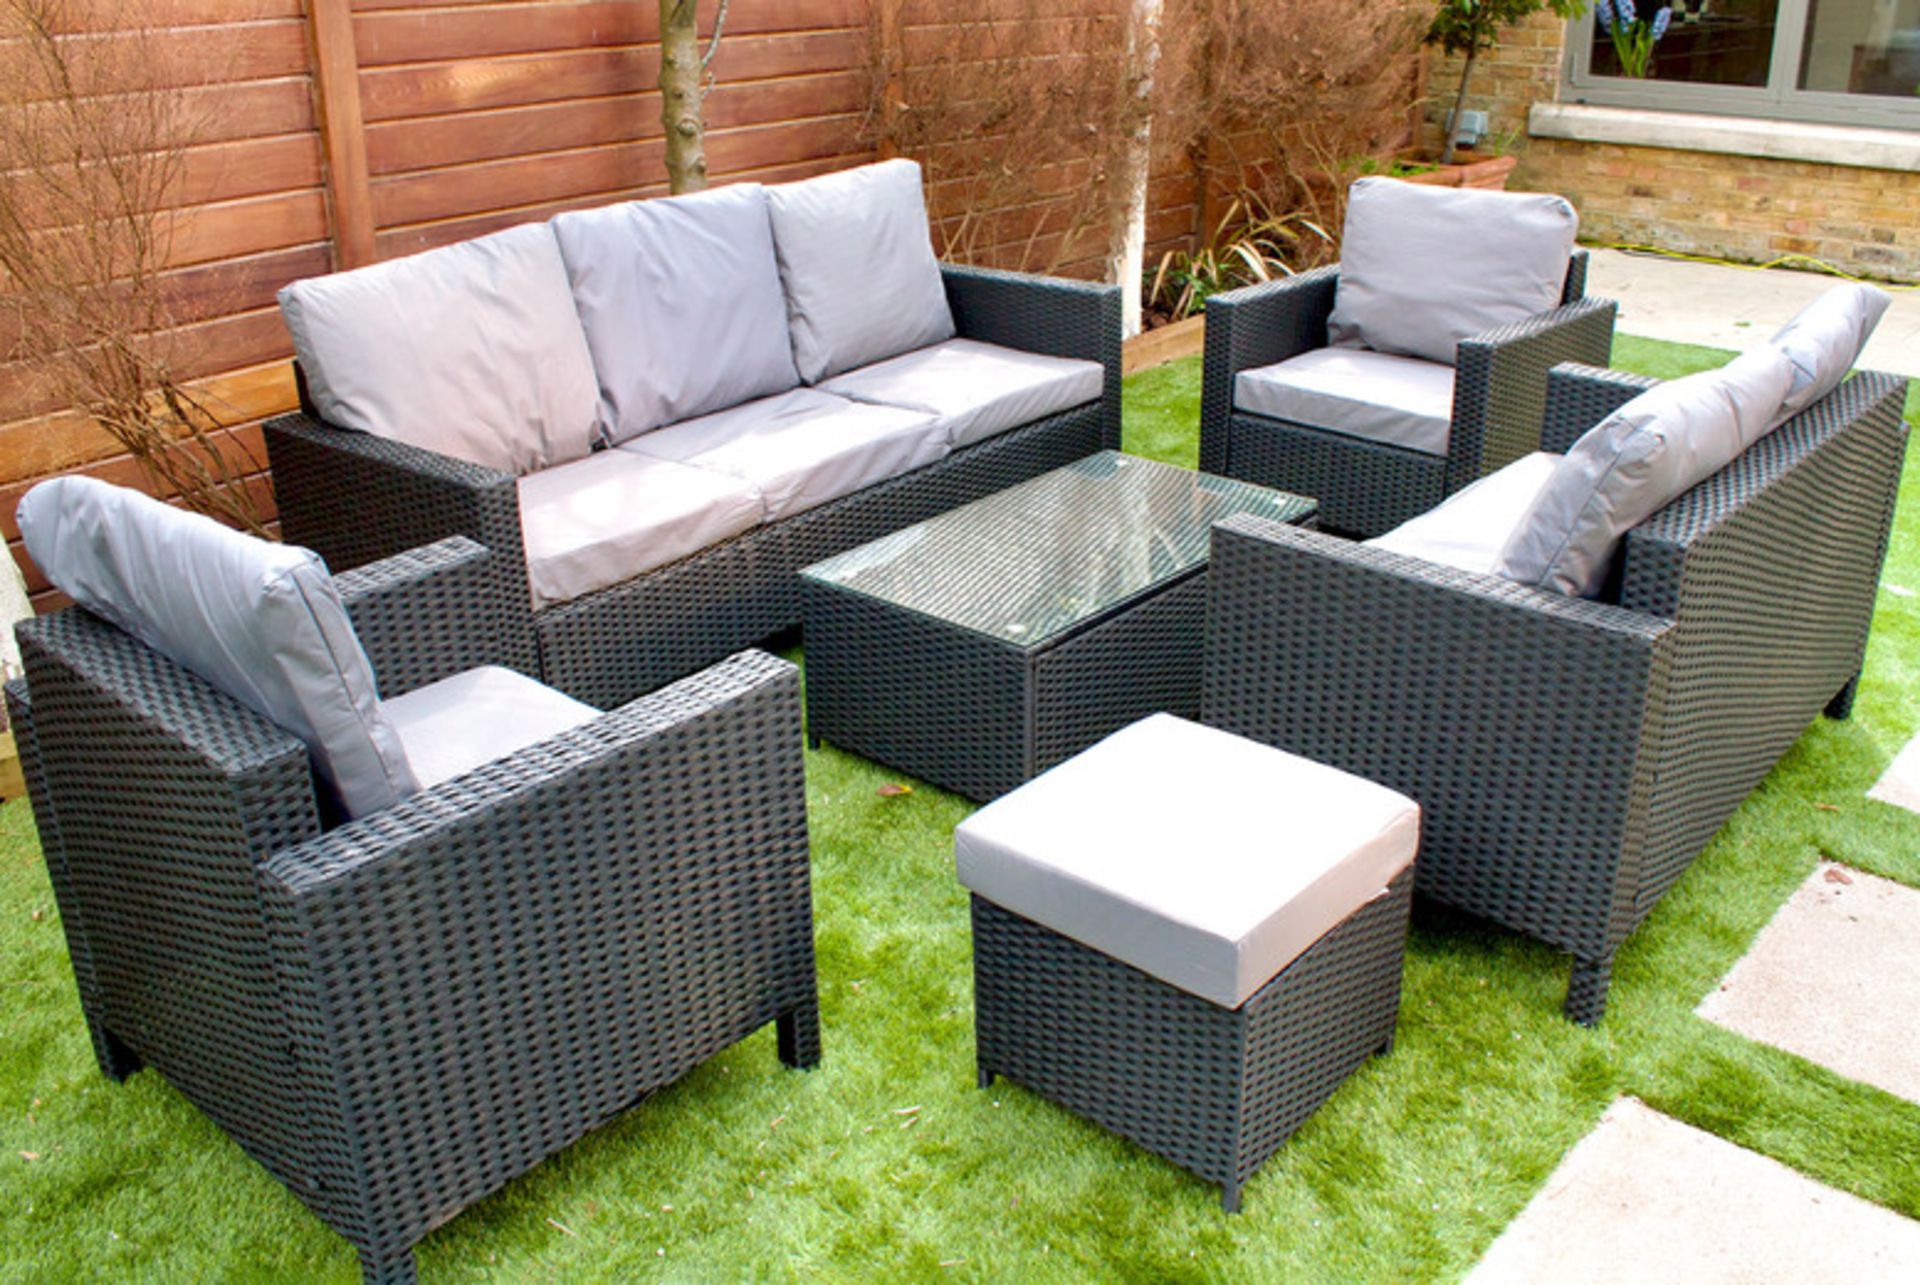 5 SETS X NEW 8-SEATER RATTAN CHAIR & SOFA GARDEN FURNITURE SET - BLACK - - Image 2 of 2